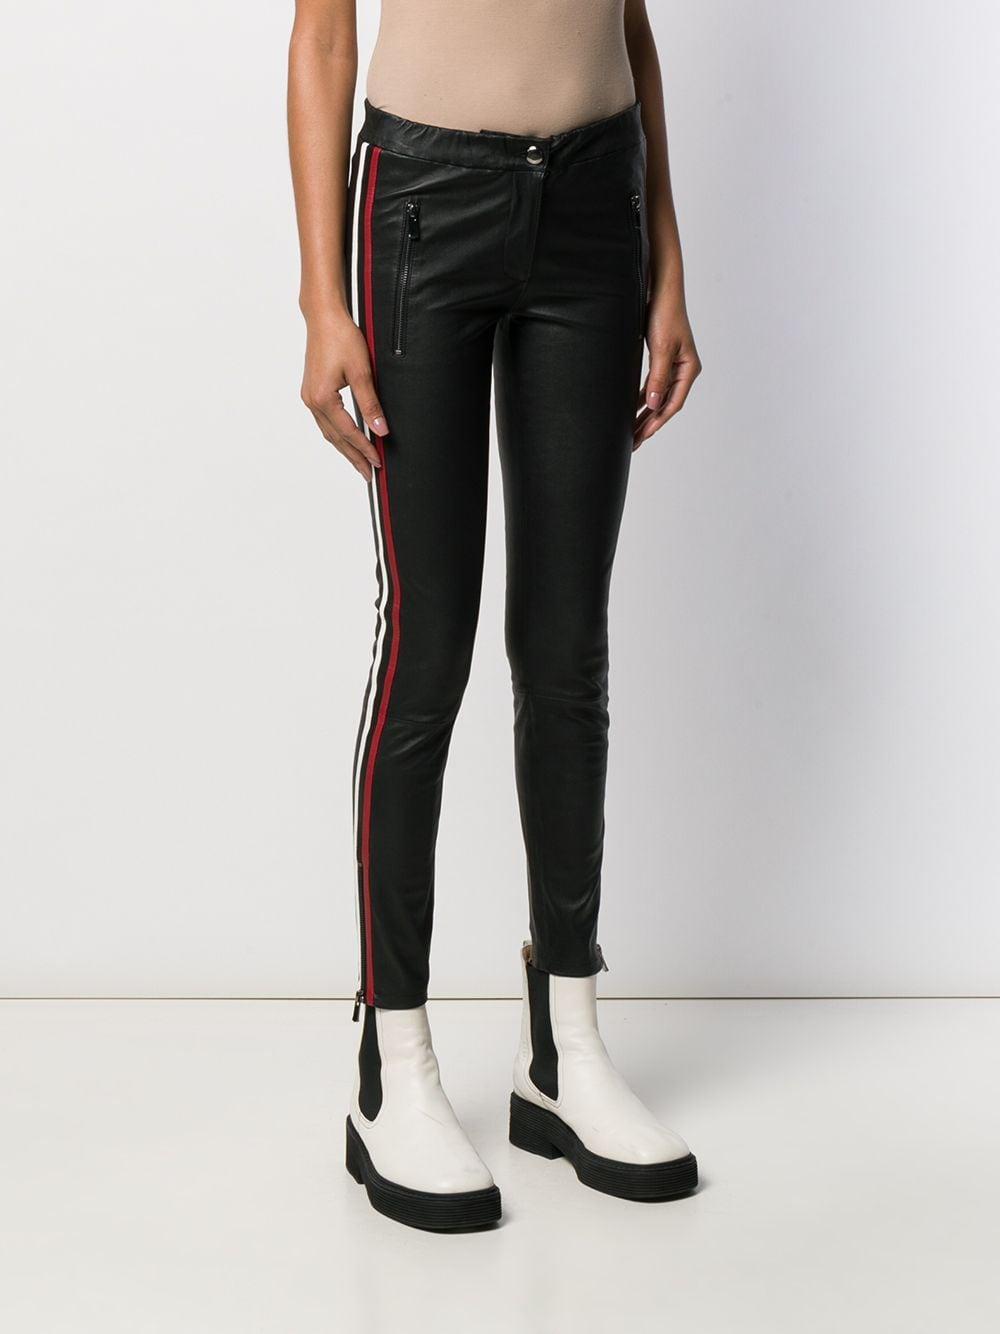 Carbon 38 Eyelet Side Panel Legging in Black Size M - $86 - From Lizanne